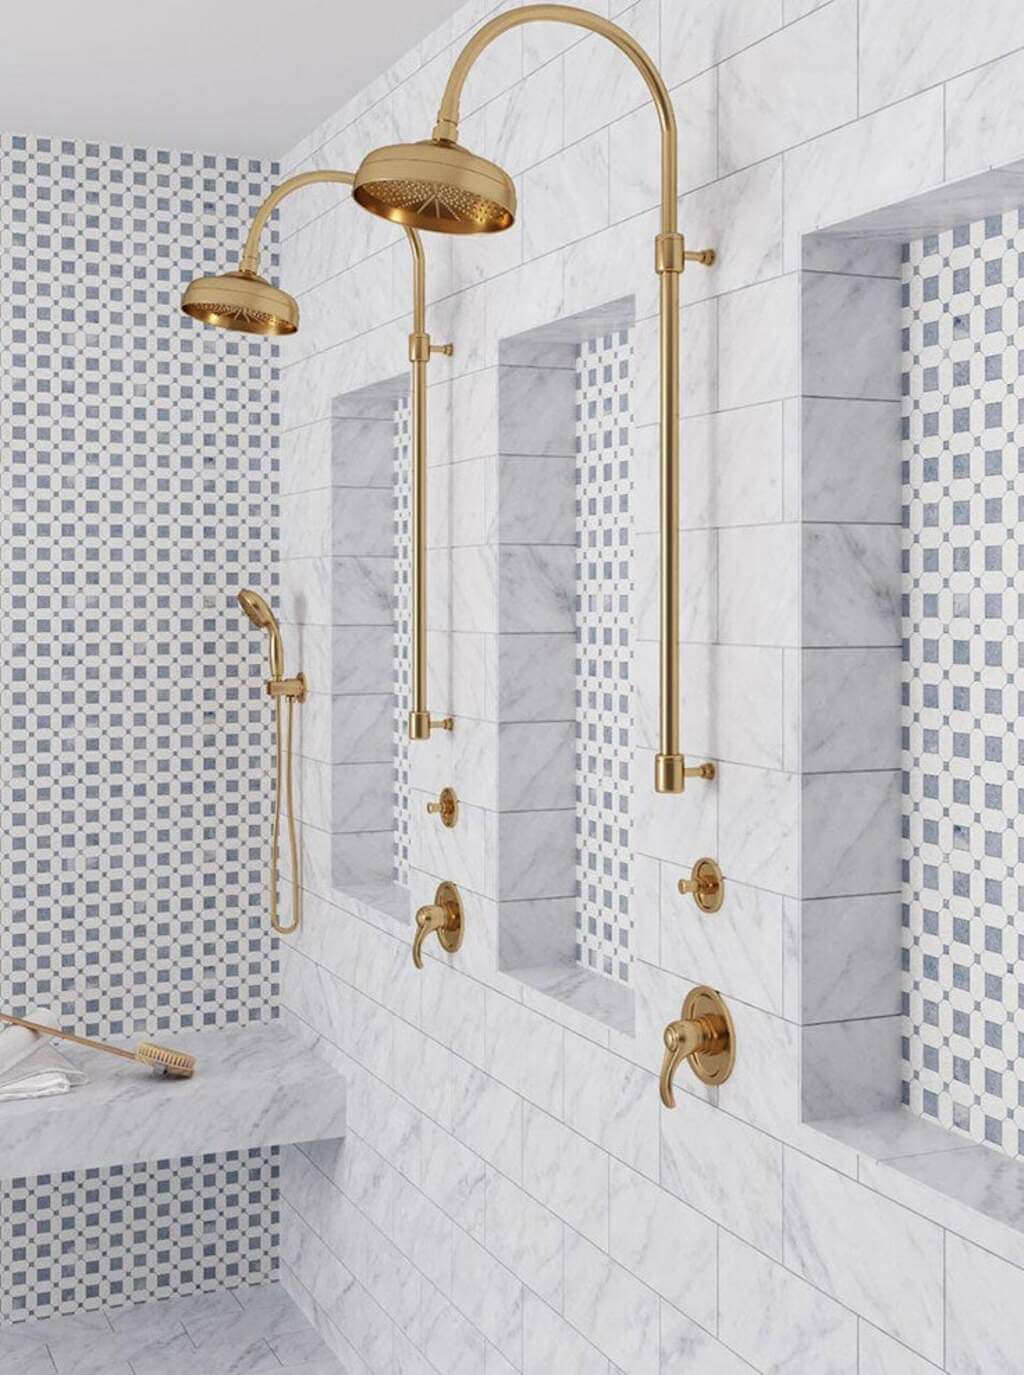 A white tiled bathroom with gold fixtures
